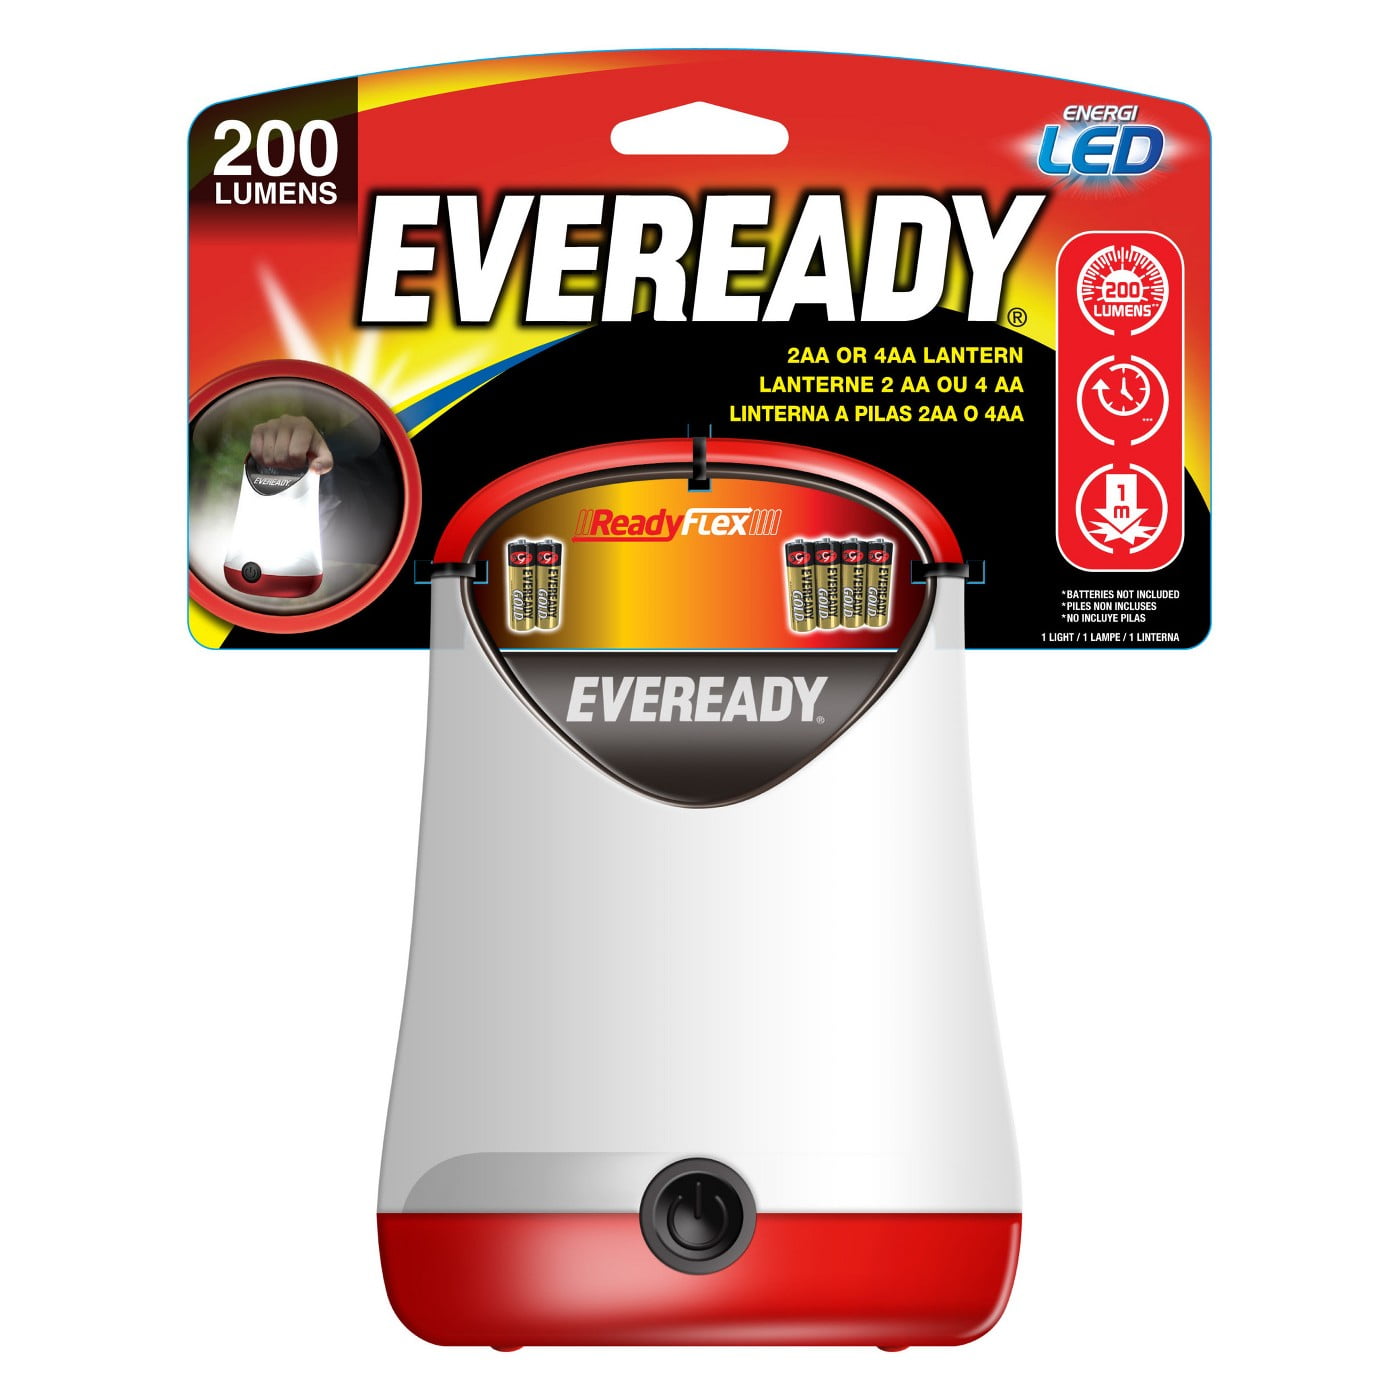 Eveready 360 LED Camping Lantern, IPX4 Water Resistant, Super 